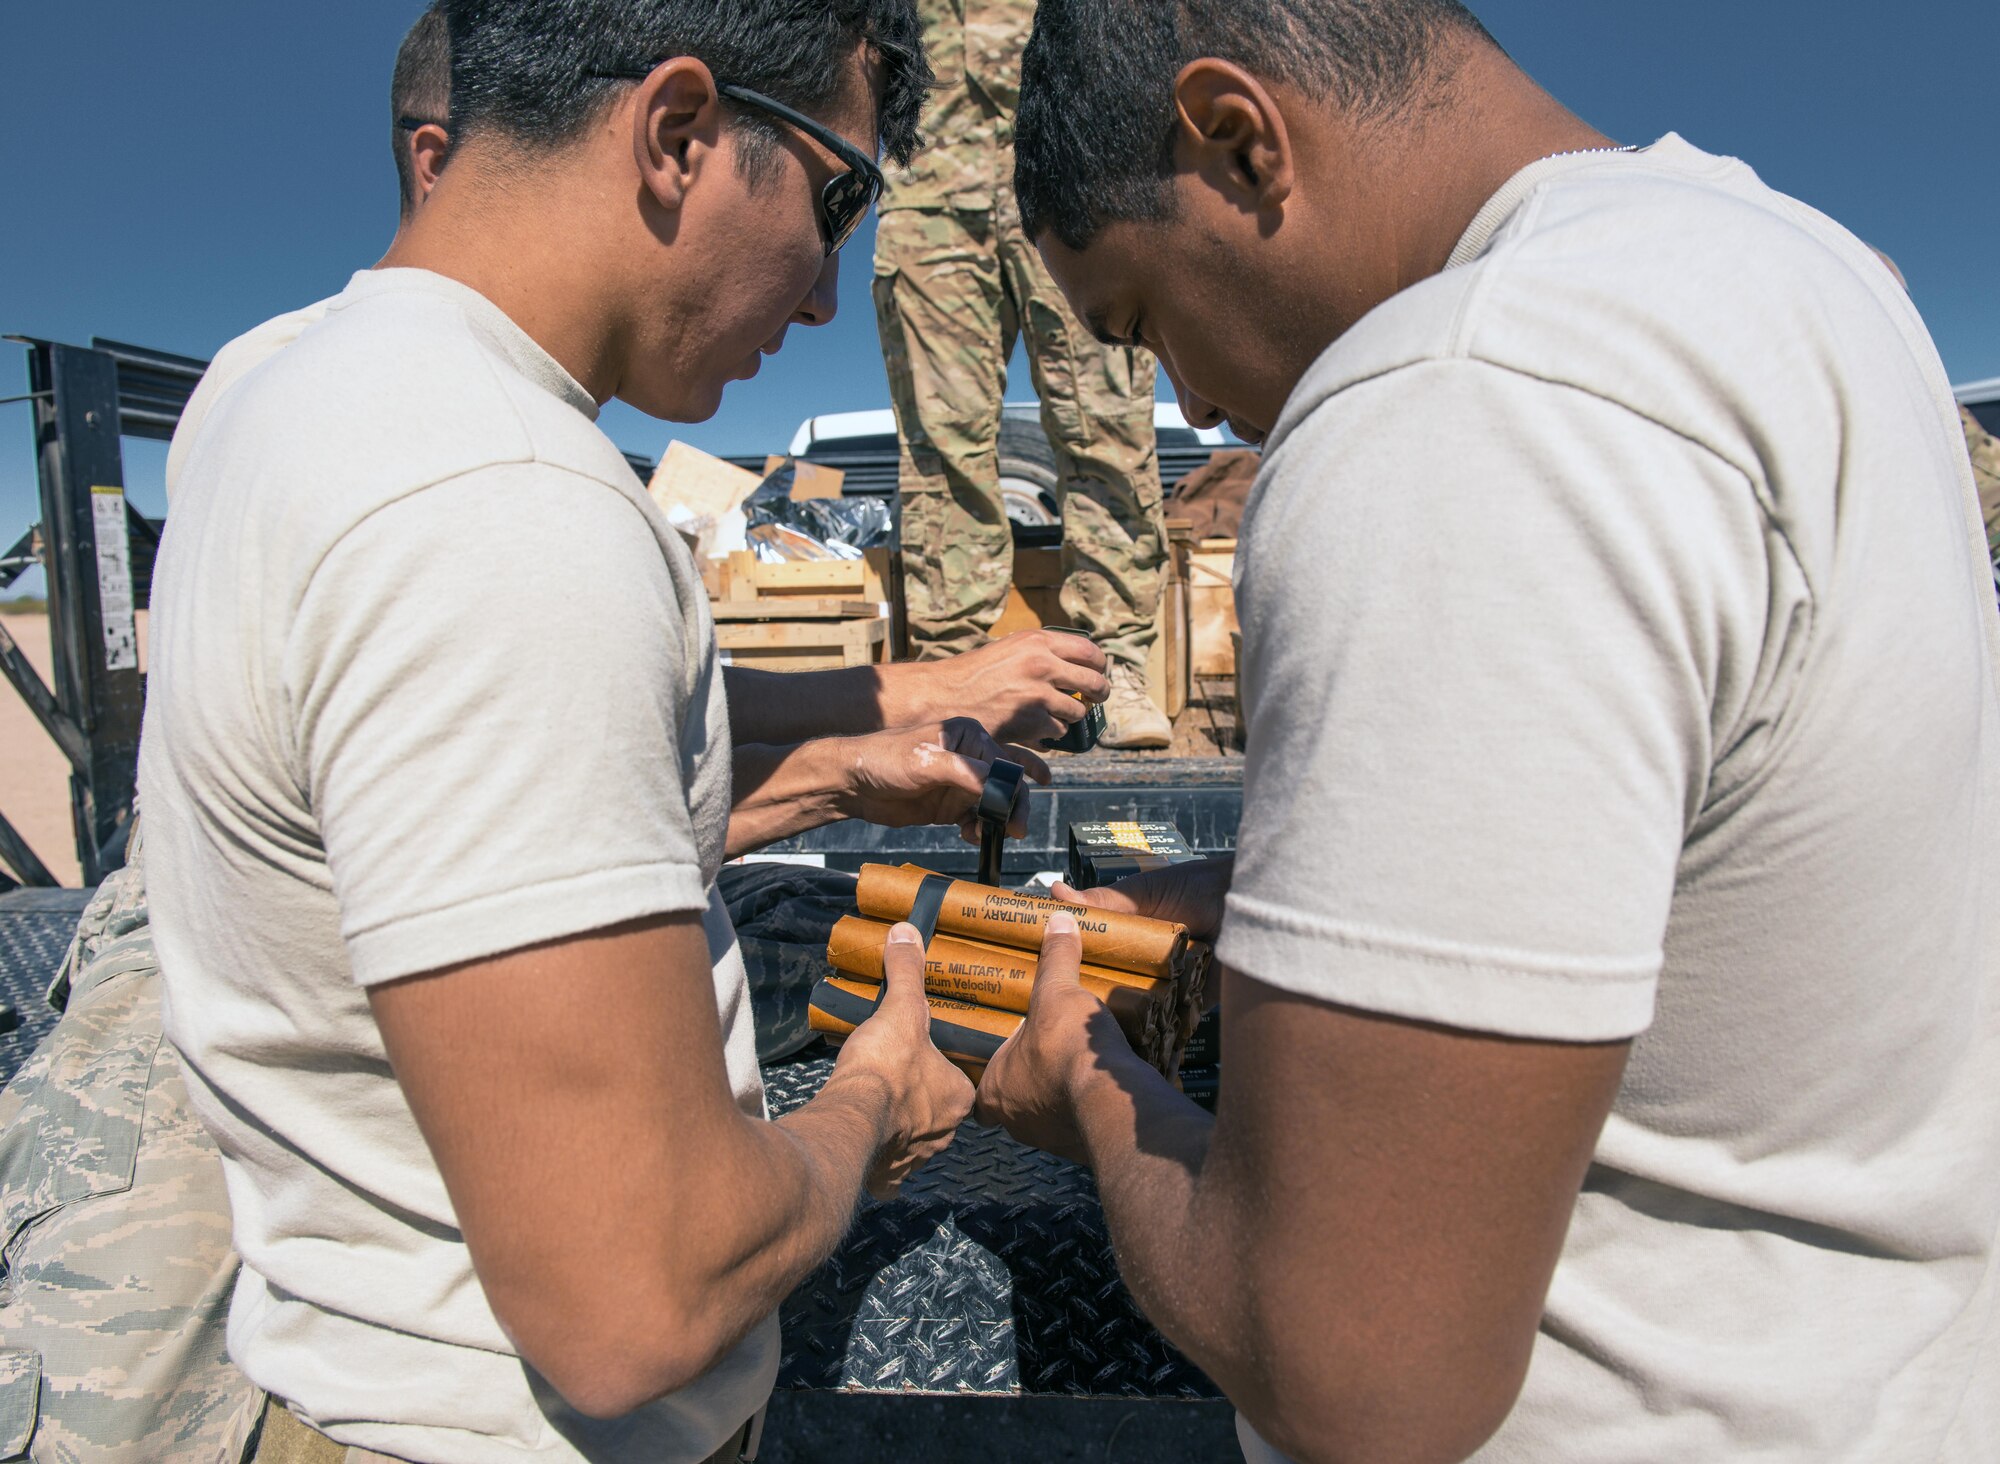 Senior Airman Tahir Finley, 56th Civil Engineer Squadron explosive ordinance disposal team member (left) and Airman 1st Class Christian Bish, 56th Equipment Maintenance Squadron munitions management apprentice, prepare sticks of dynamite for detonation at the Gila Bend Air Force Auxiliary Field in Gila Bend, Ariz., Sept. 21, 2017. Throughout the demolition day, EOD Airmen worked together to ensure safety when handling explosives. (U.S. Air Force photo/Airman 1st Class Alexander Cook)